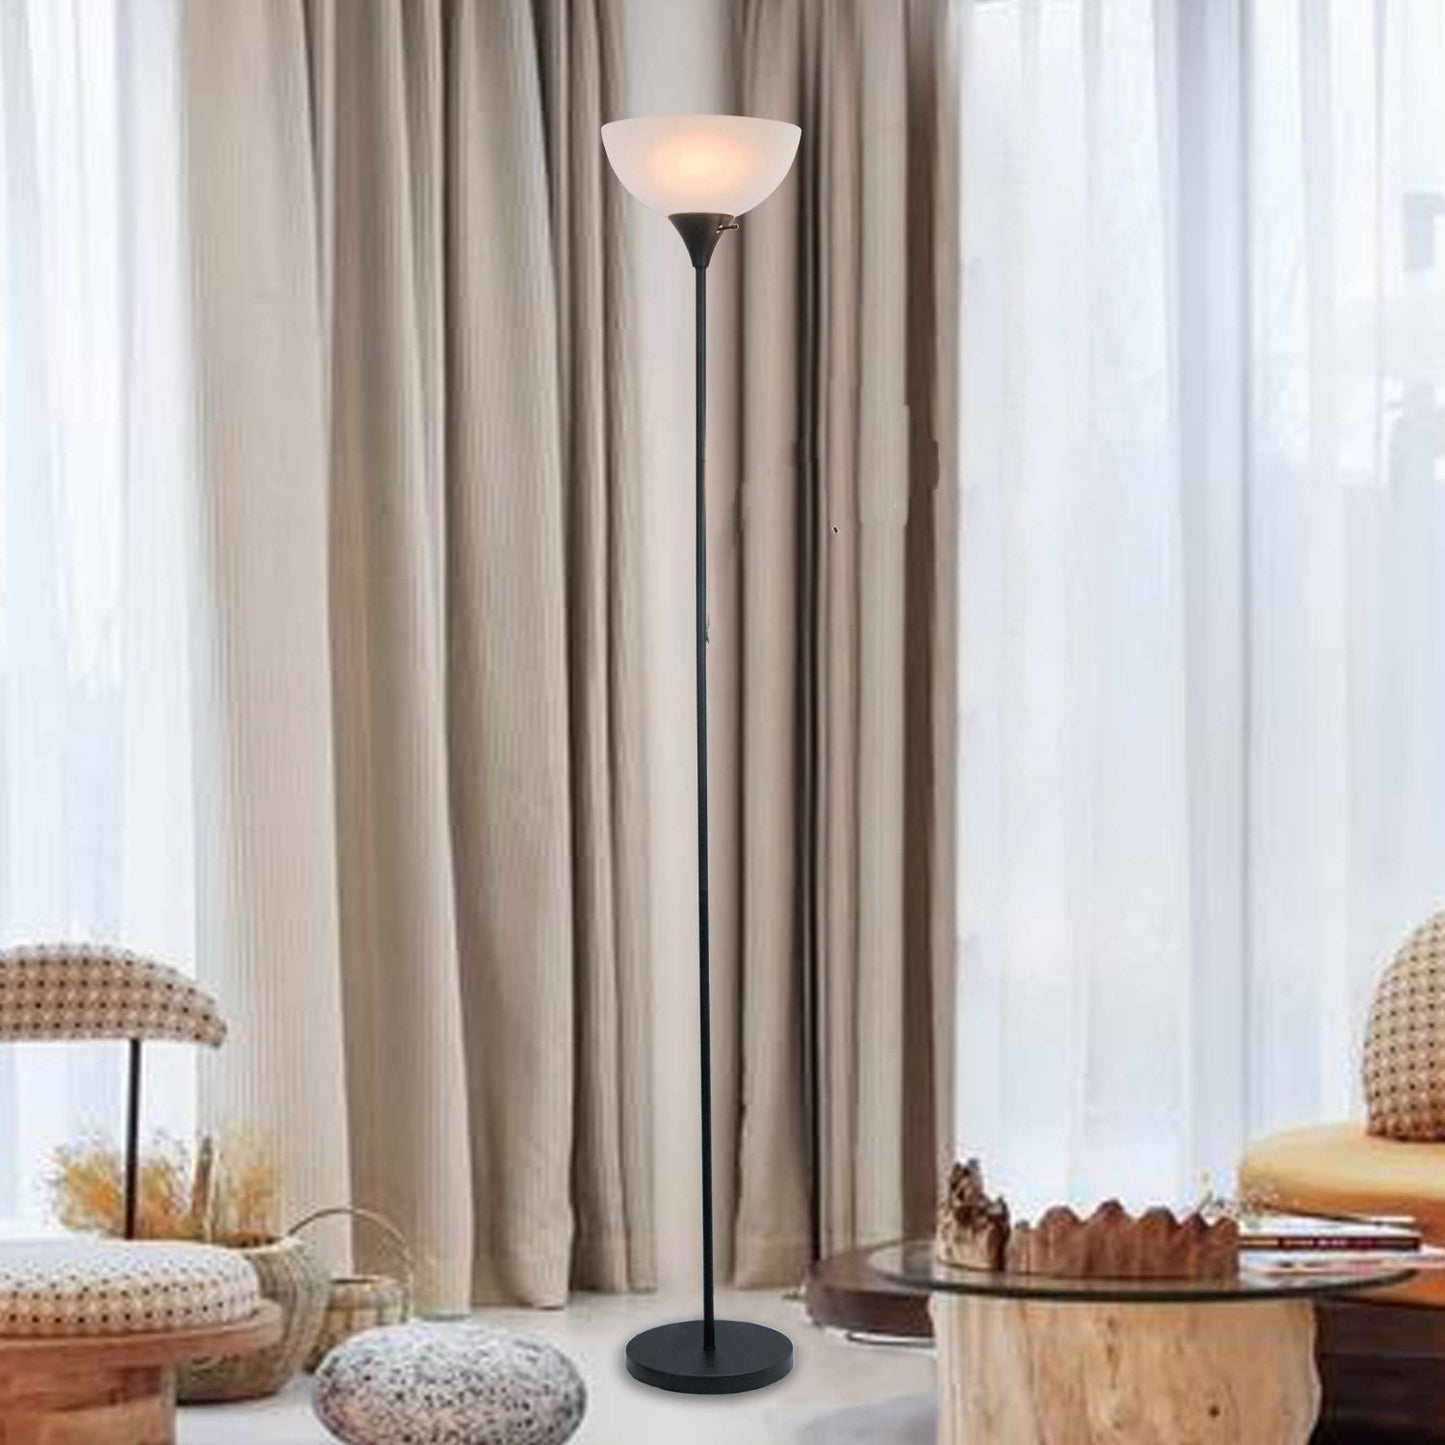 Floor Lamp with Opal White Shade-  Standing Torch Lamp Tall Lamp